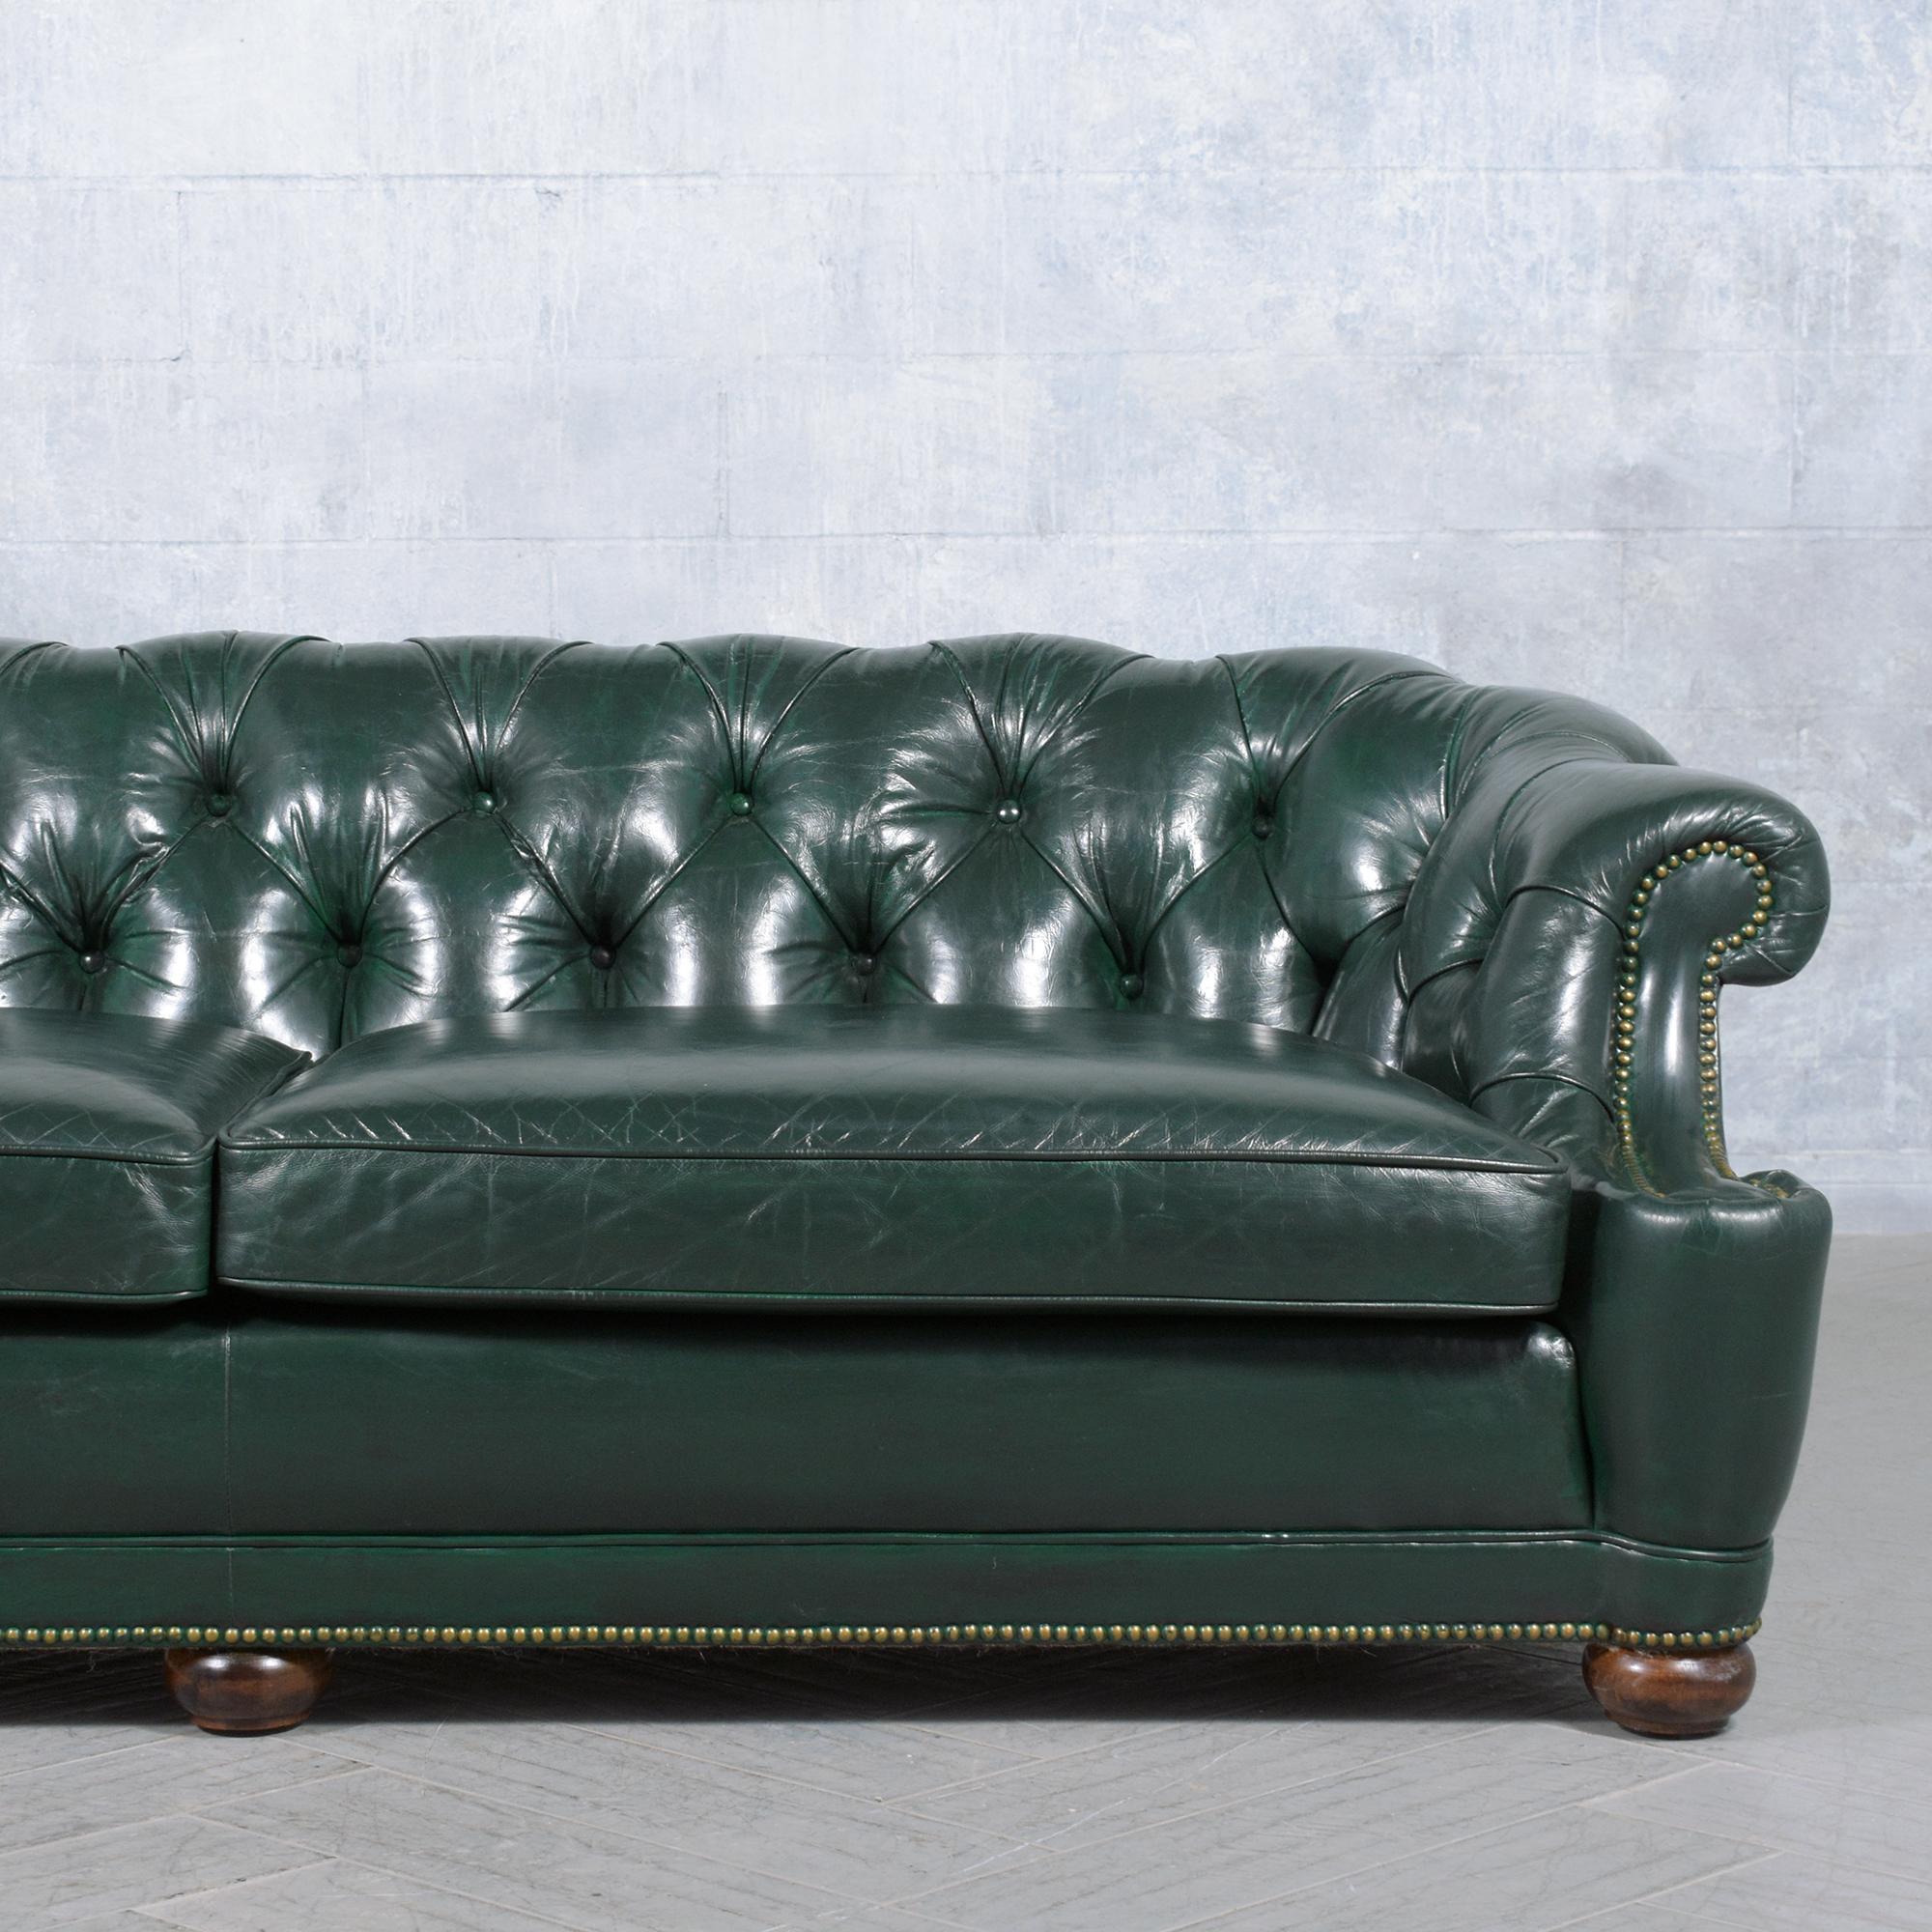 Stained Refurbished 1970s Emerald Green Italian Chesterfield Sofa - Vintage Elegance